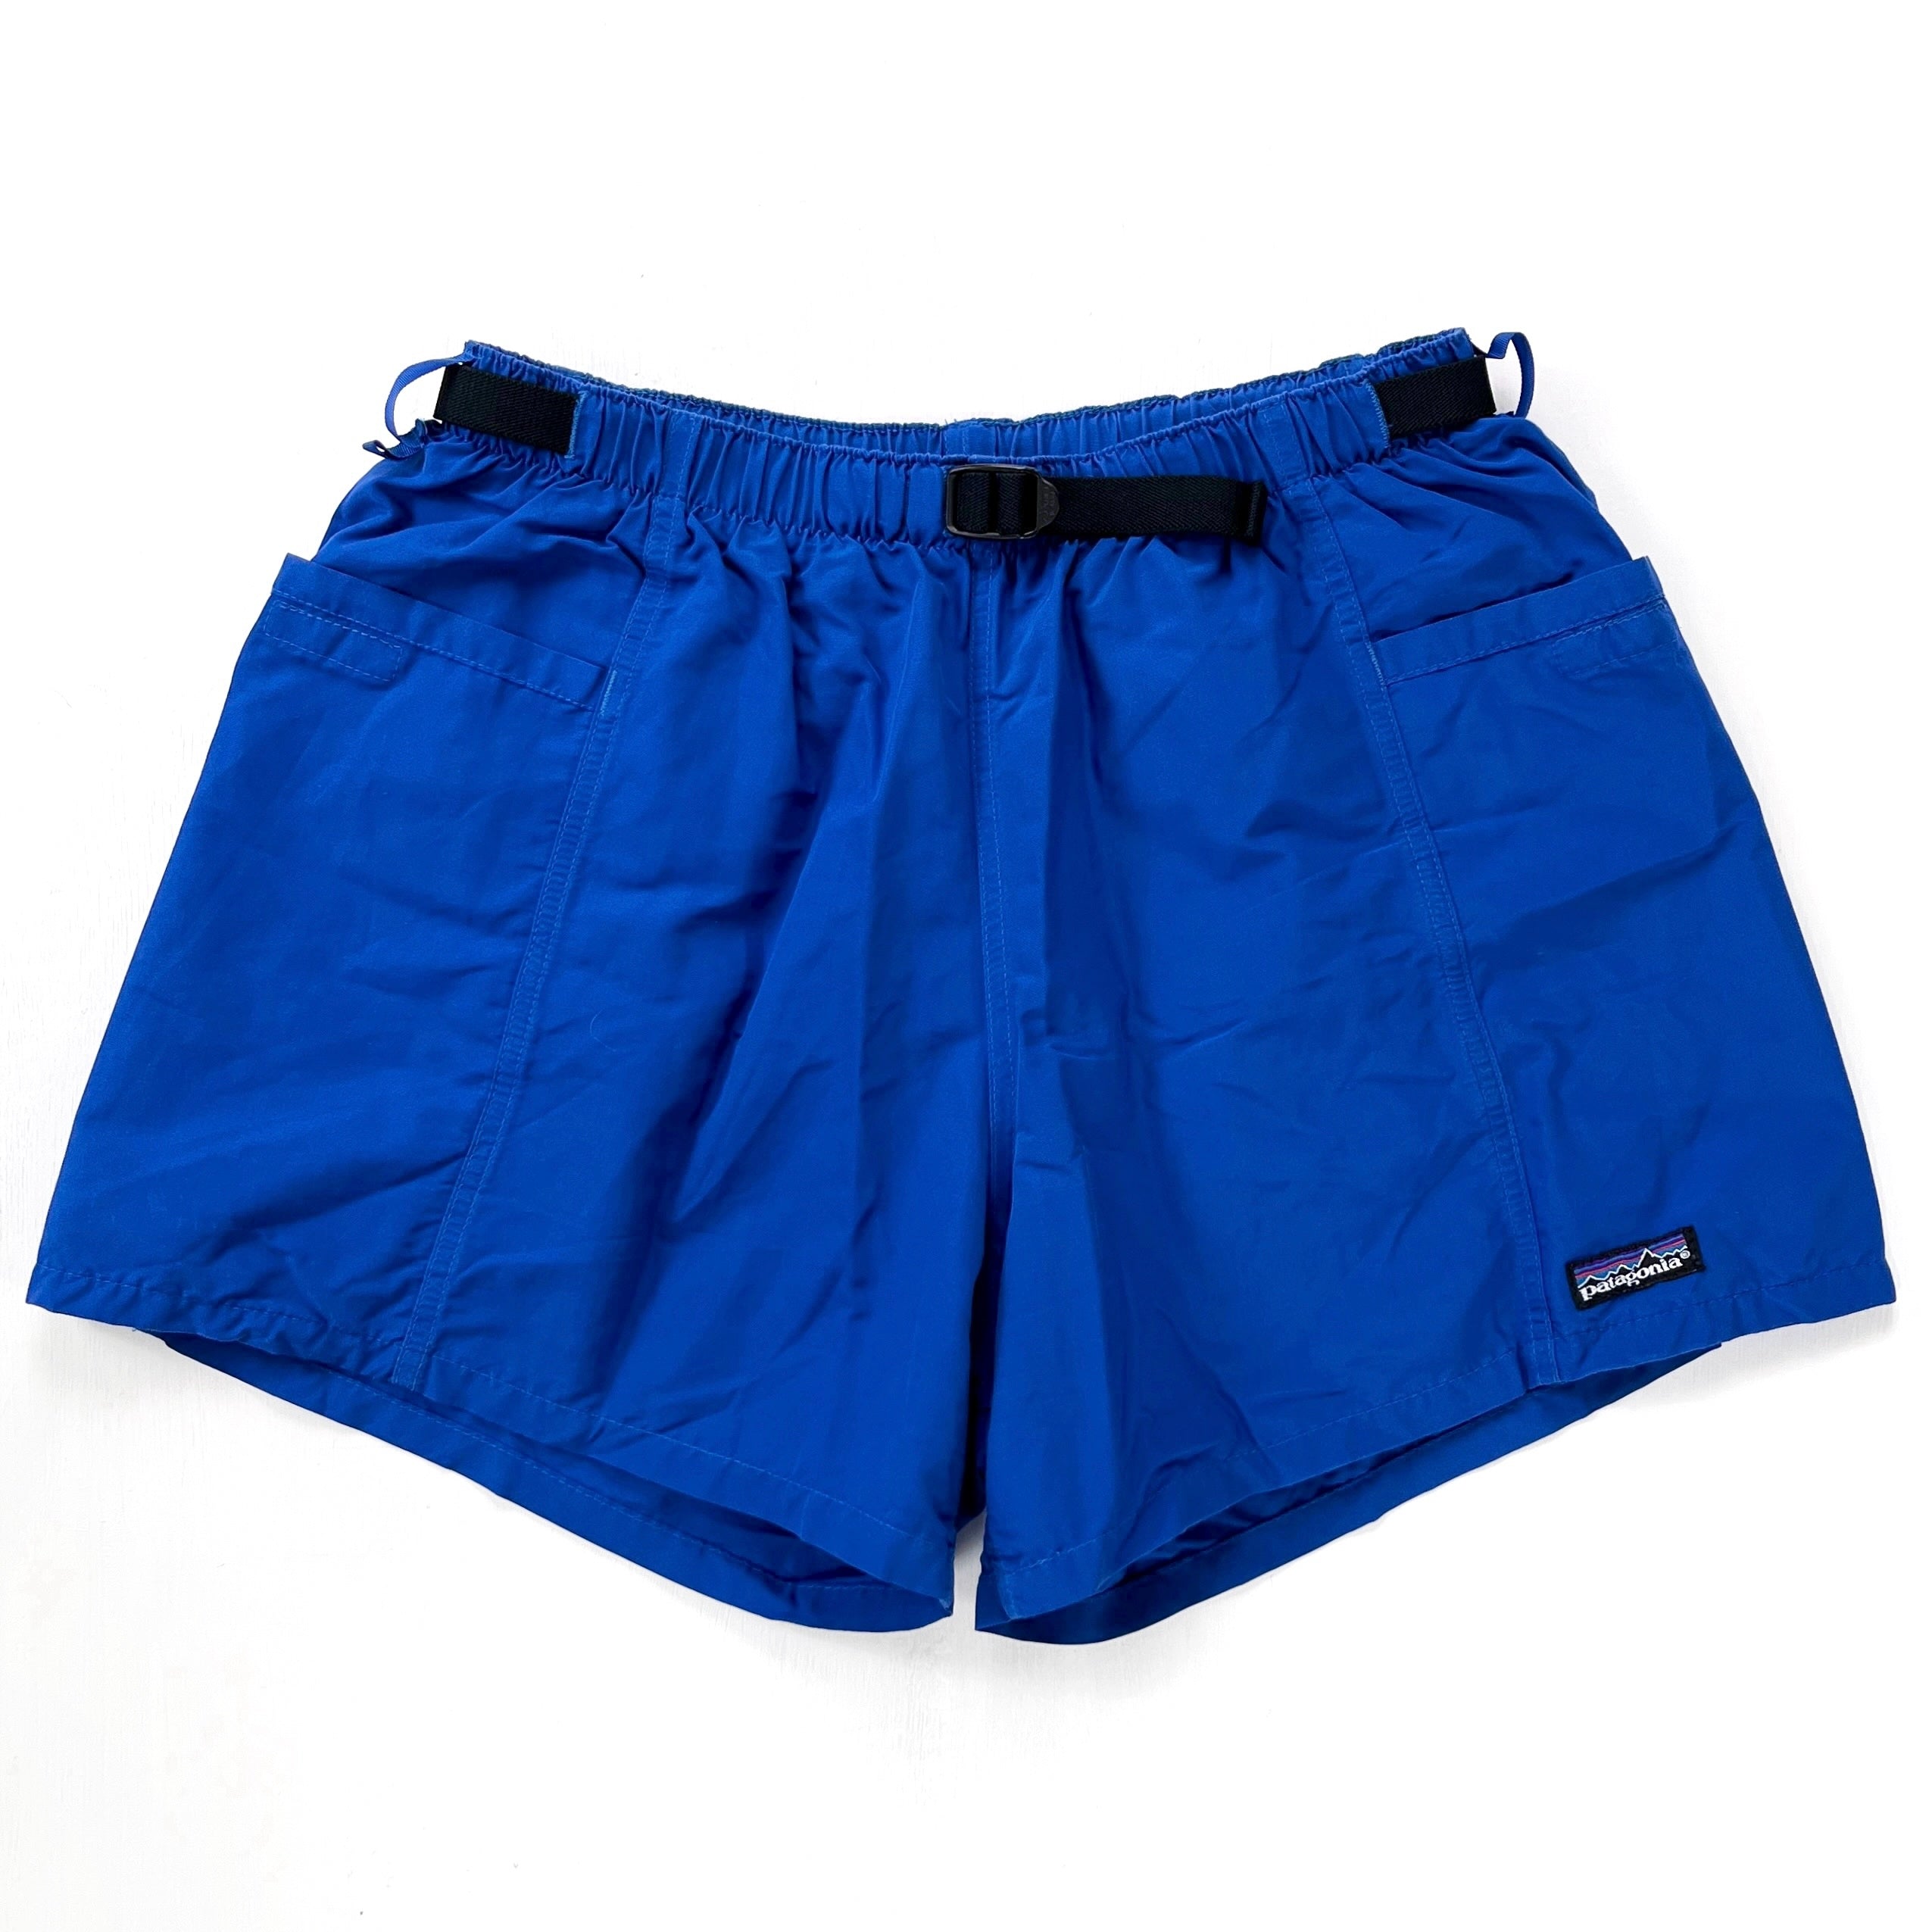 1989 Patagonia Made In The U.S.A. 4” Belted River Shorts, Cobalt (L)